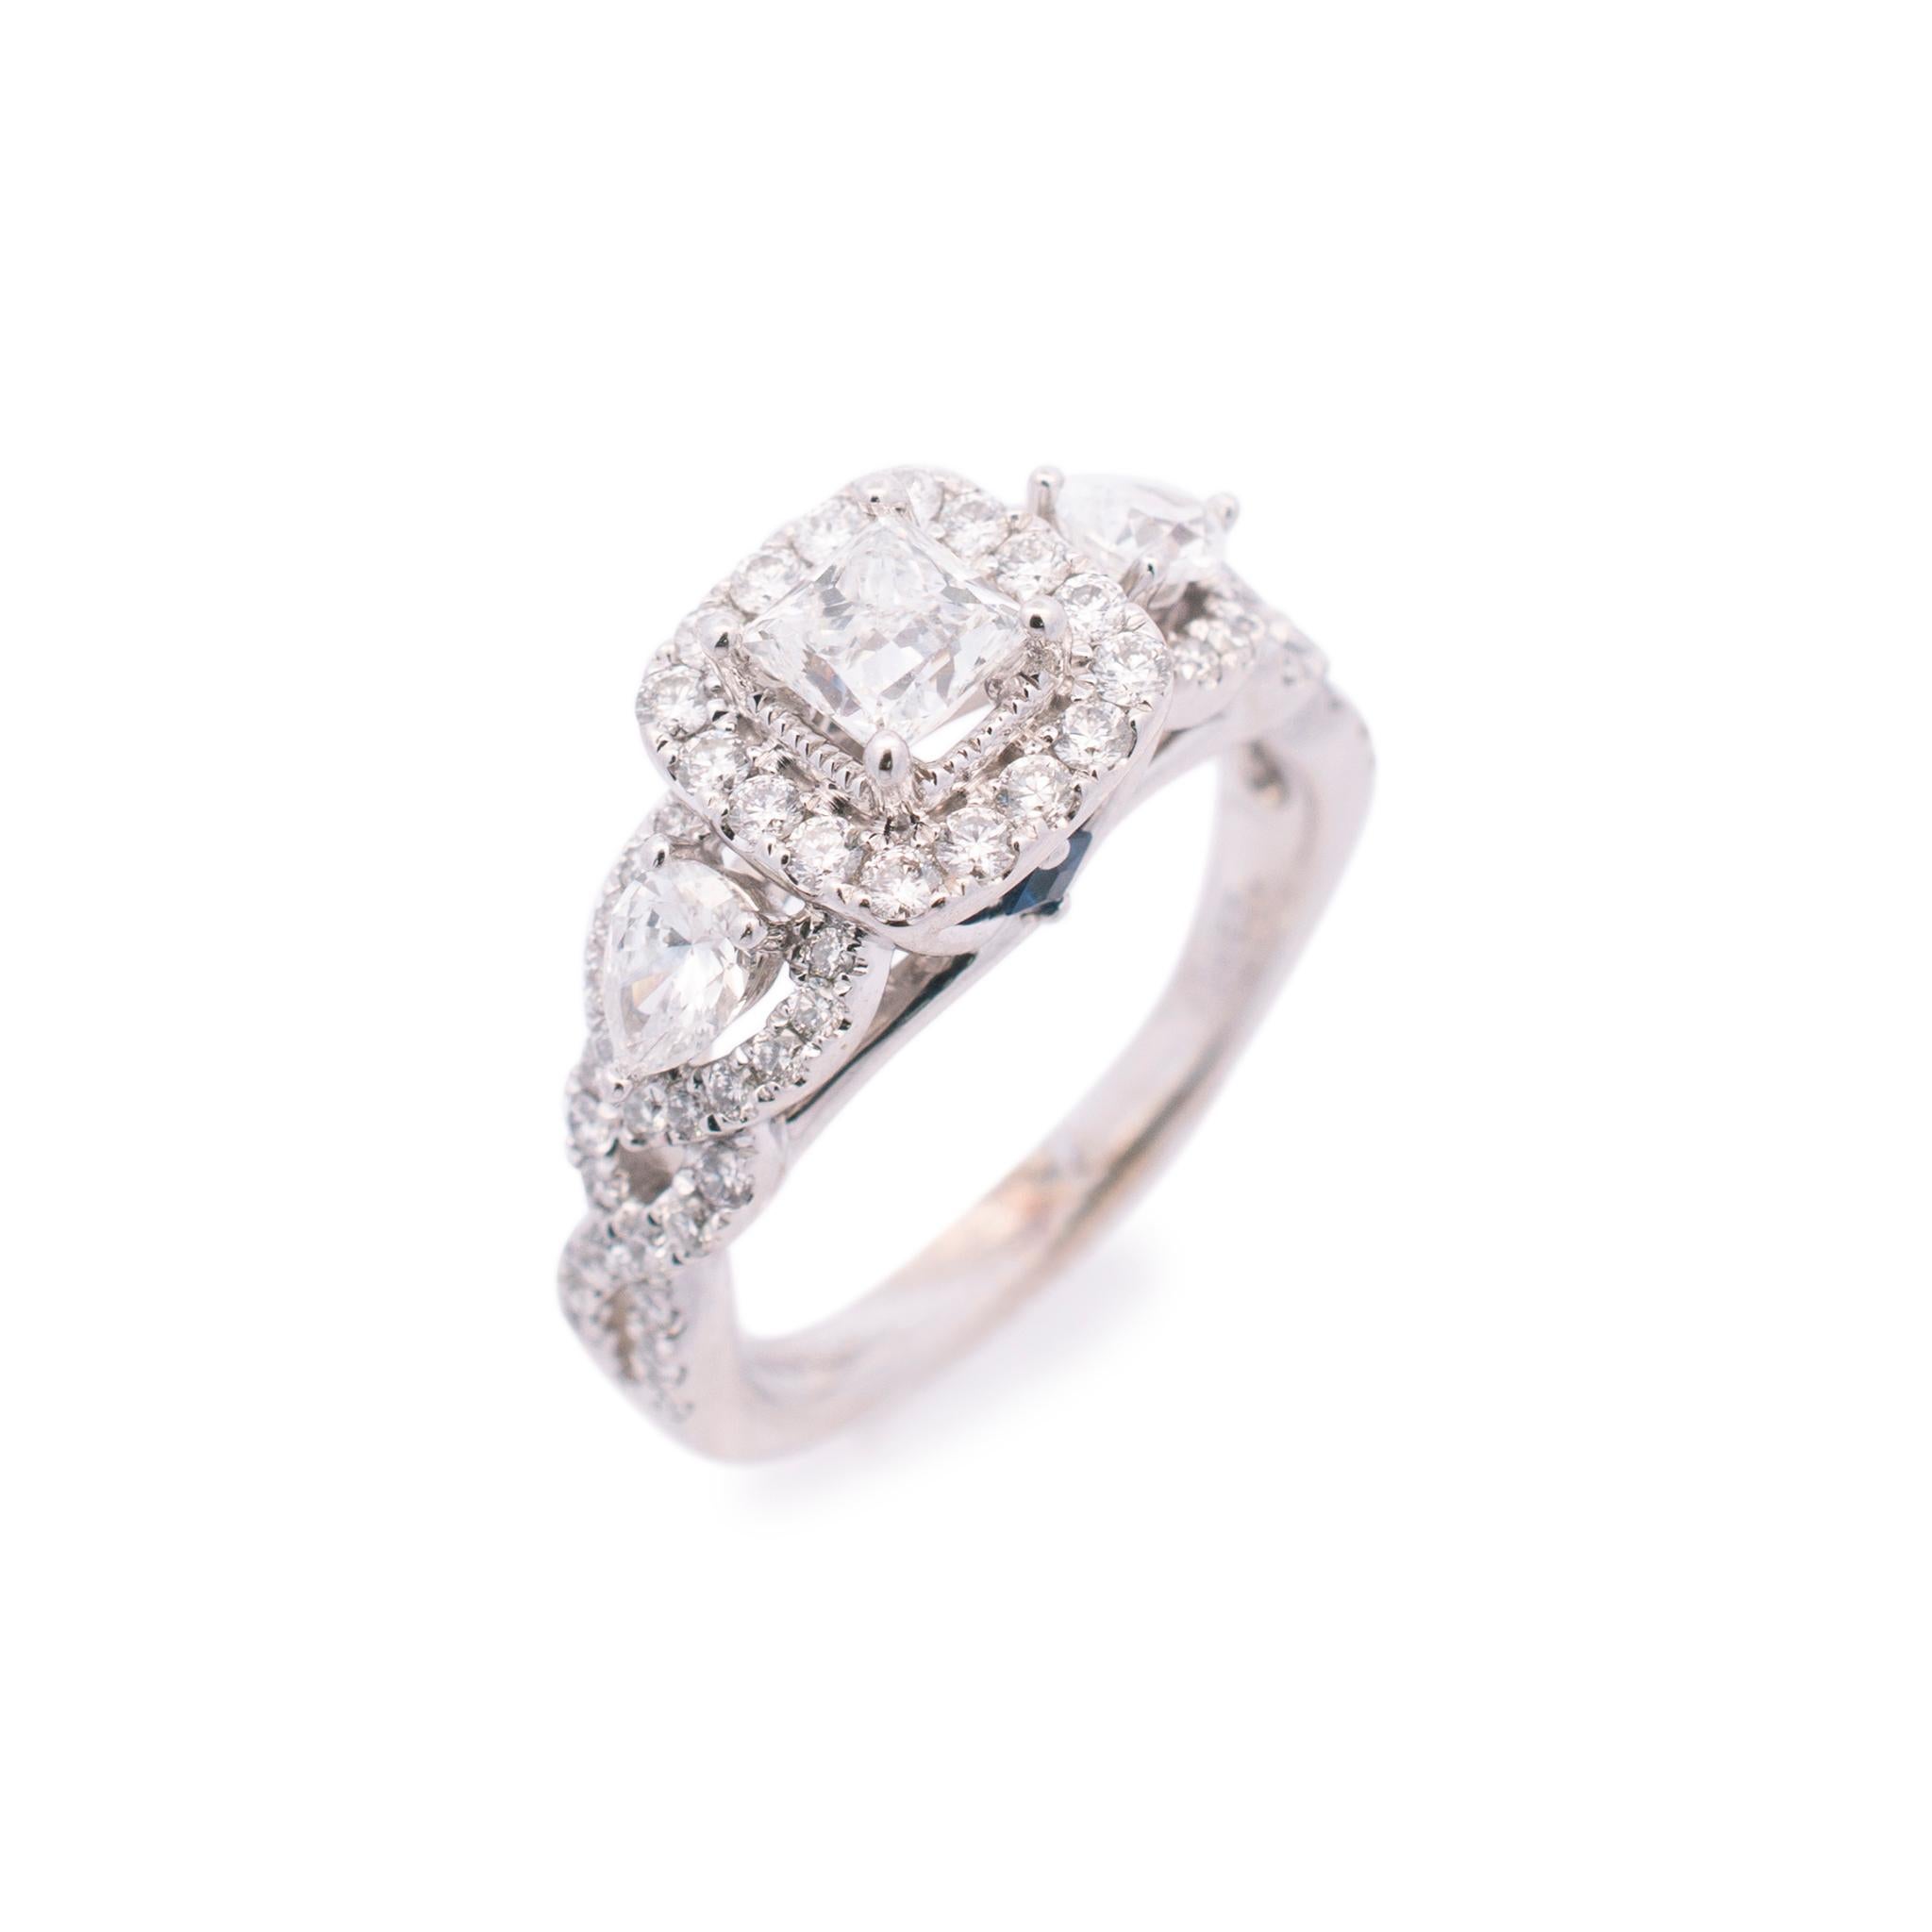 Brand: Vera Wang

Gender: Ladies

Metal Type: 14K White Gold

Size (US): 6.5

Shank Width: 2.00mm

Head Measurements: 9.00mm

Weight: 5.70 grams

Ladies VERA WANG 14K white gold diamond and sapphire engagement halo three-stone ring with a half round